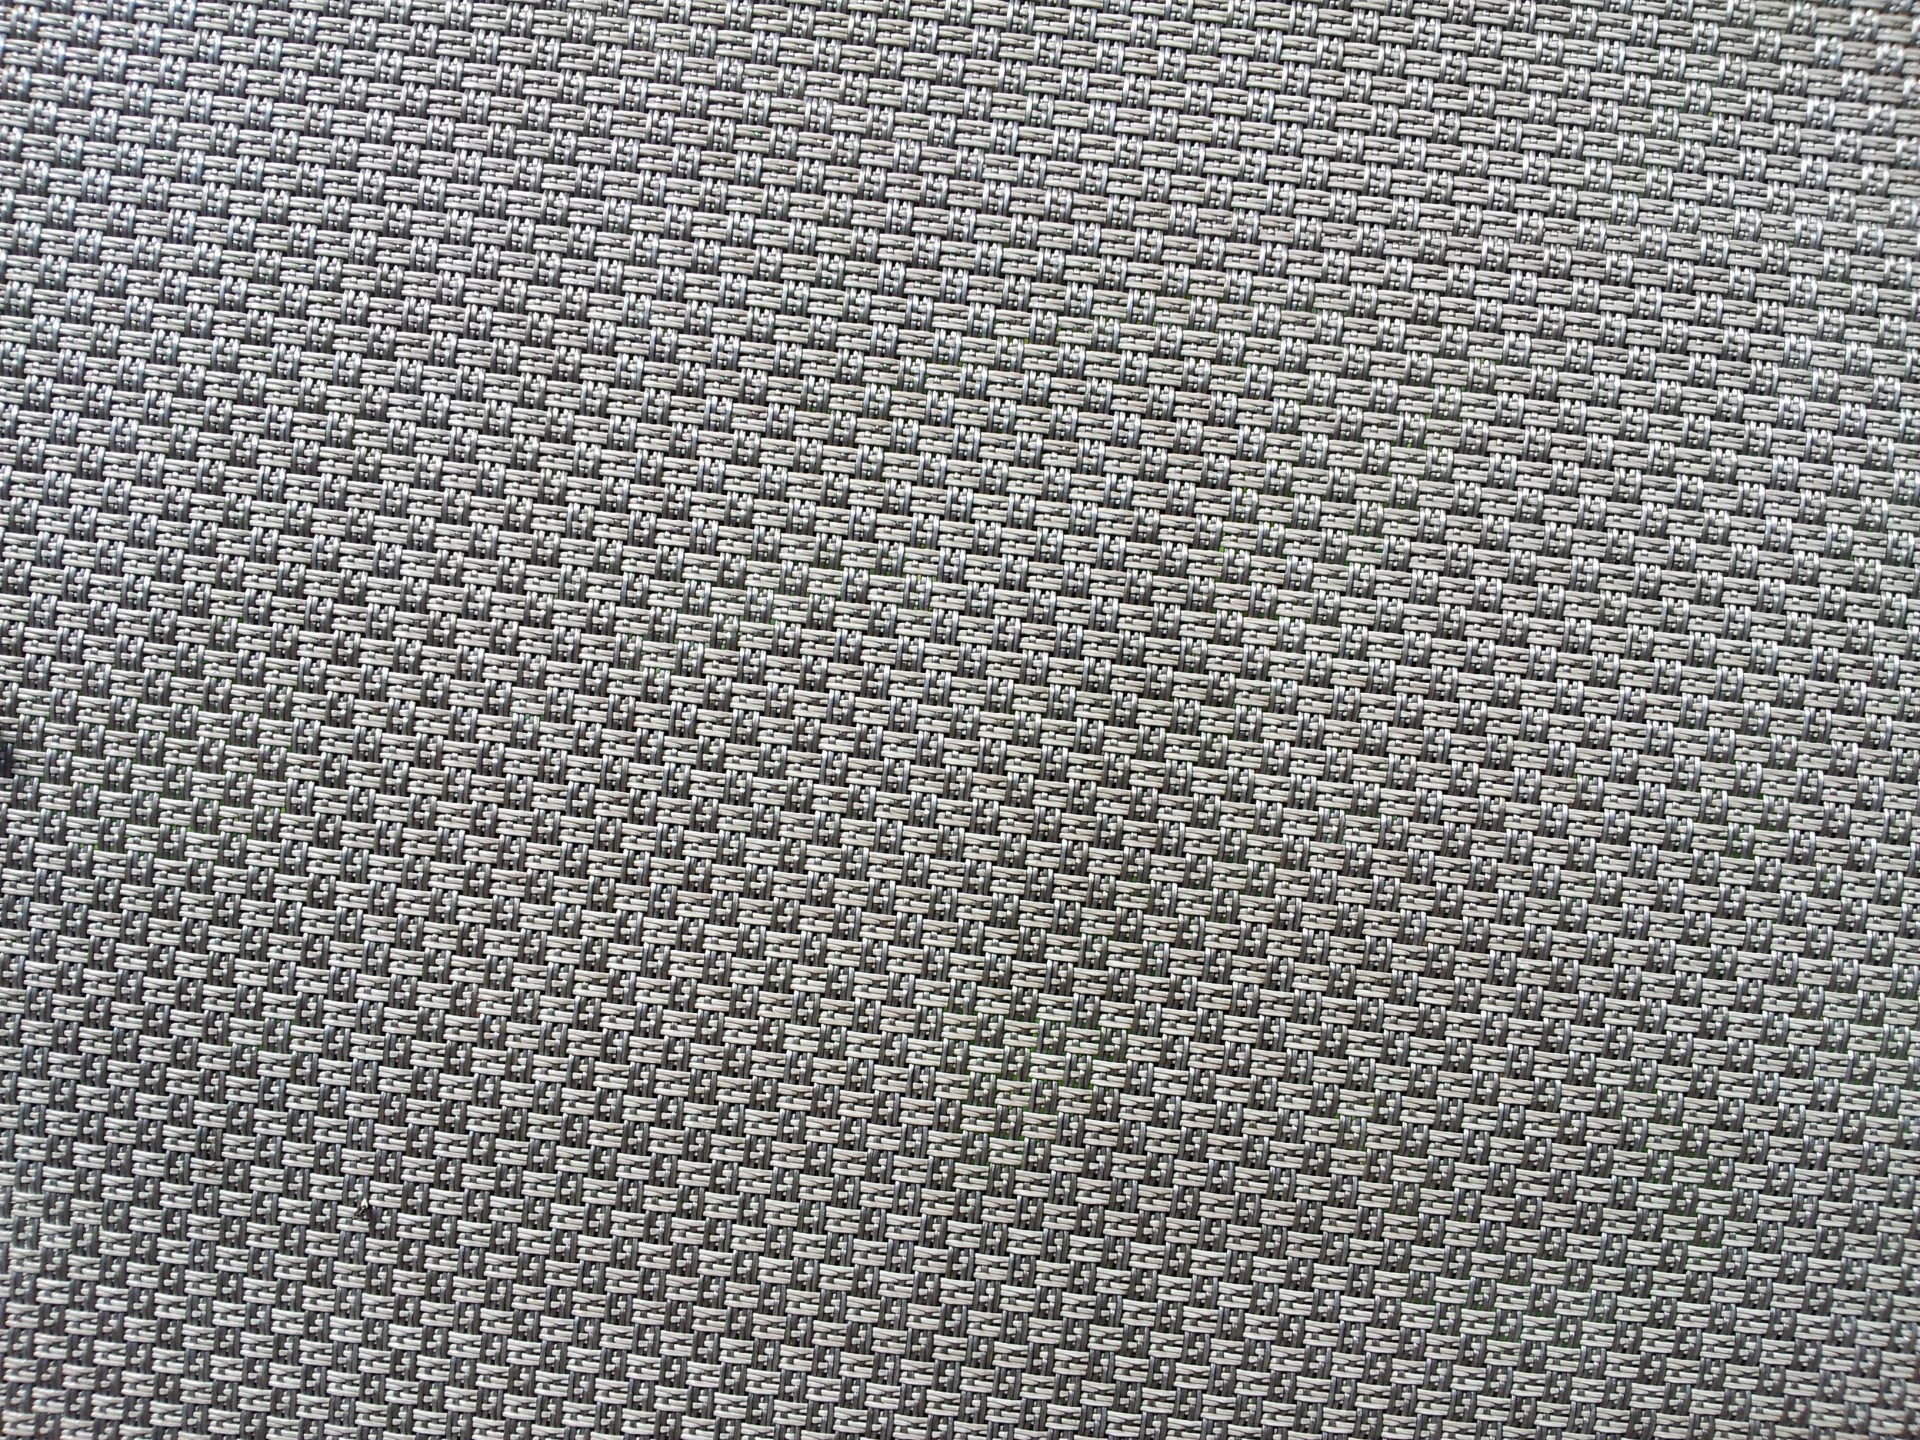 stainless steel net texture wallpaper background free photo